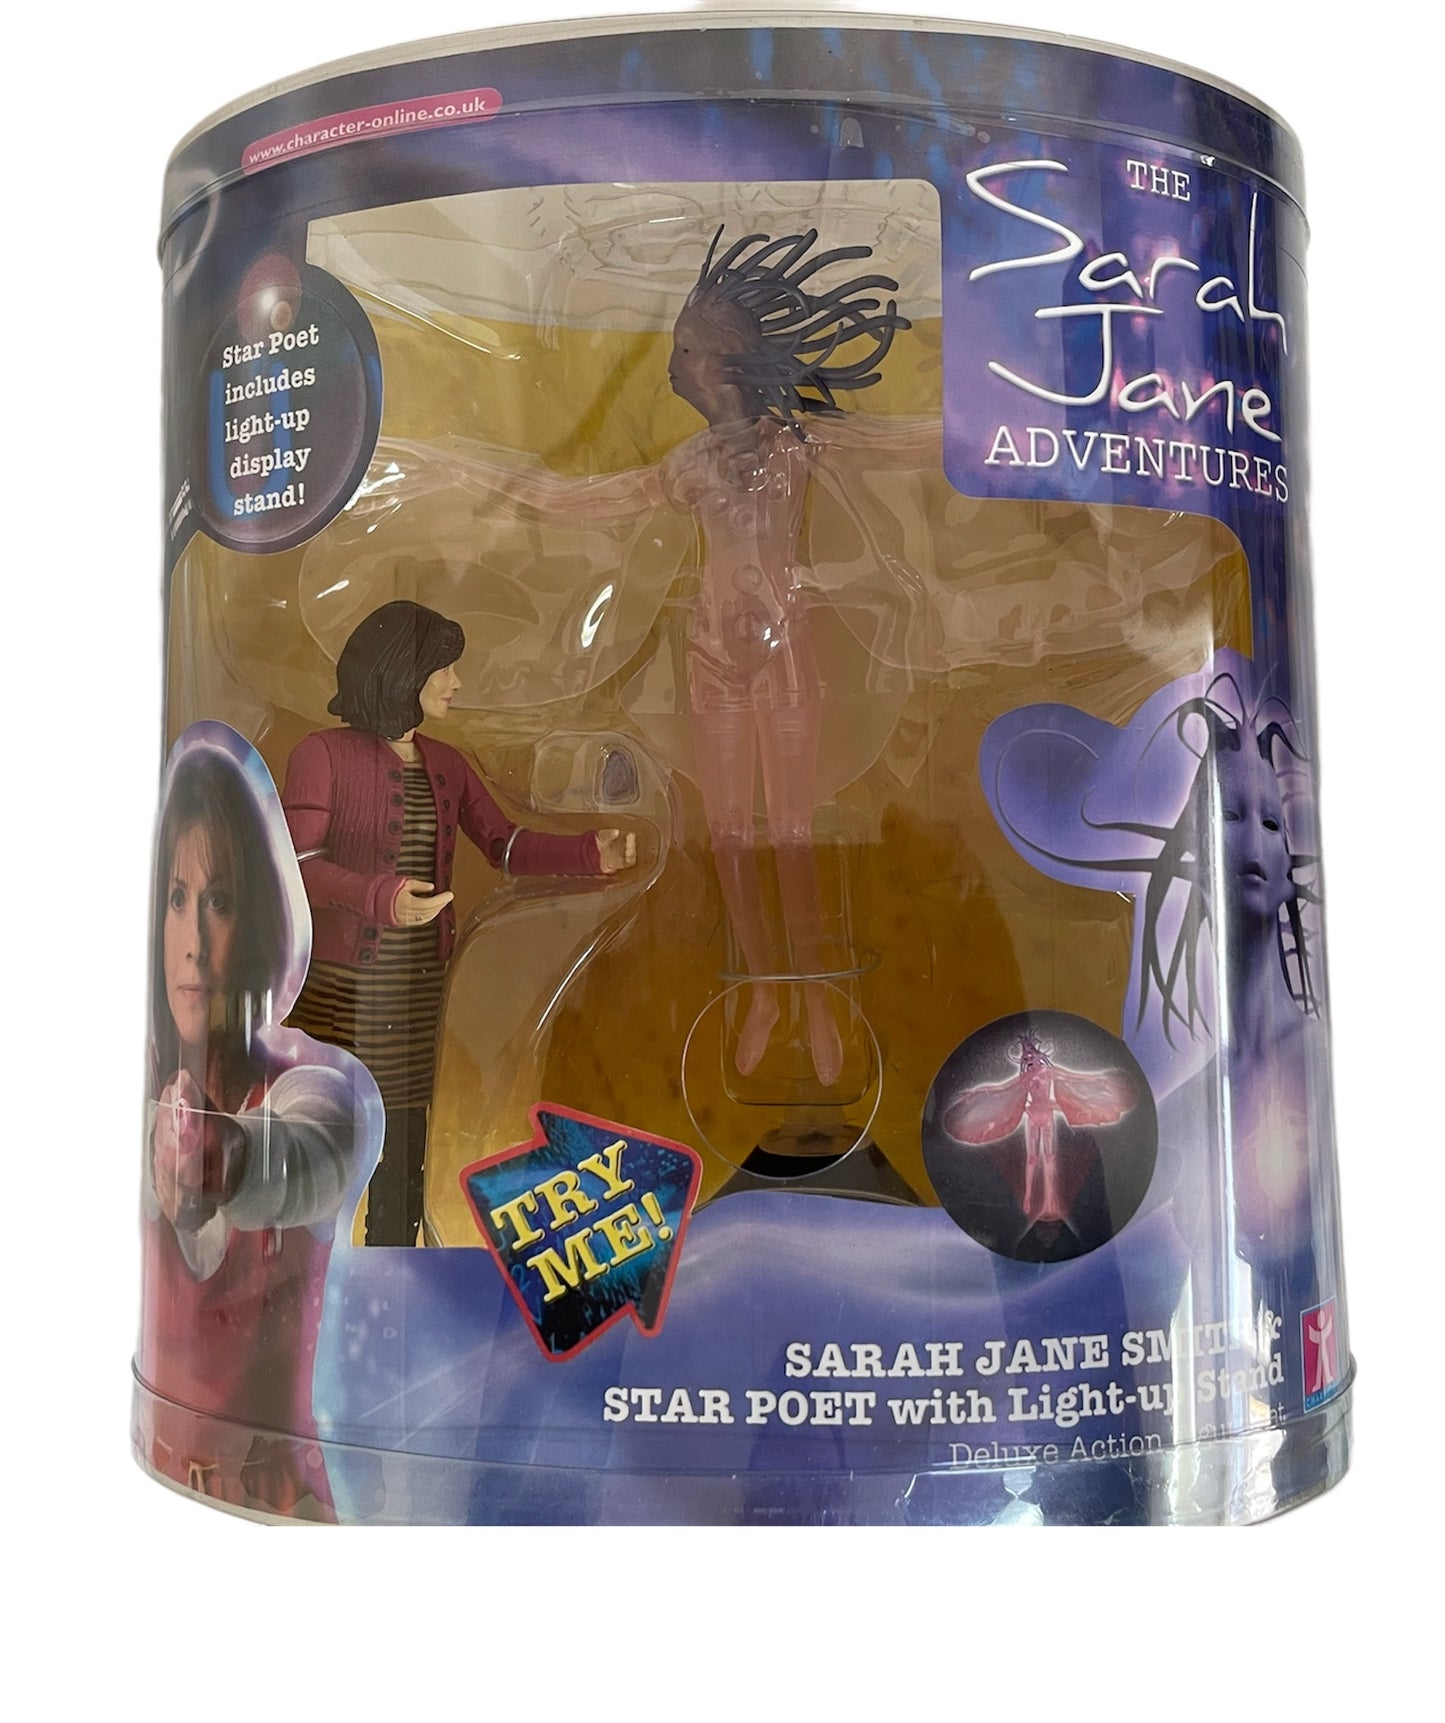 Vintage 2006 The Sarah Jane Adventures - Sarah Jane Smith & Star Poet With Light Up Stand Deluxe Action Figure Set